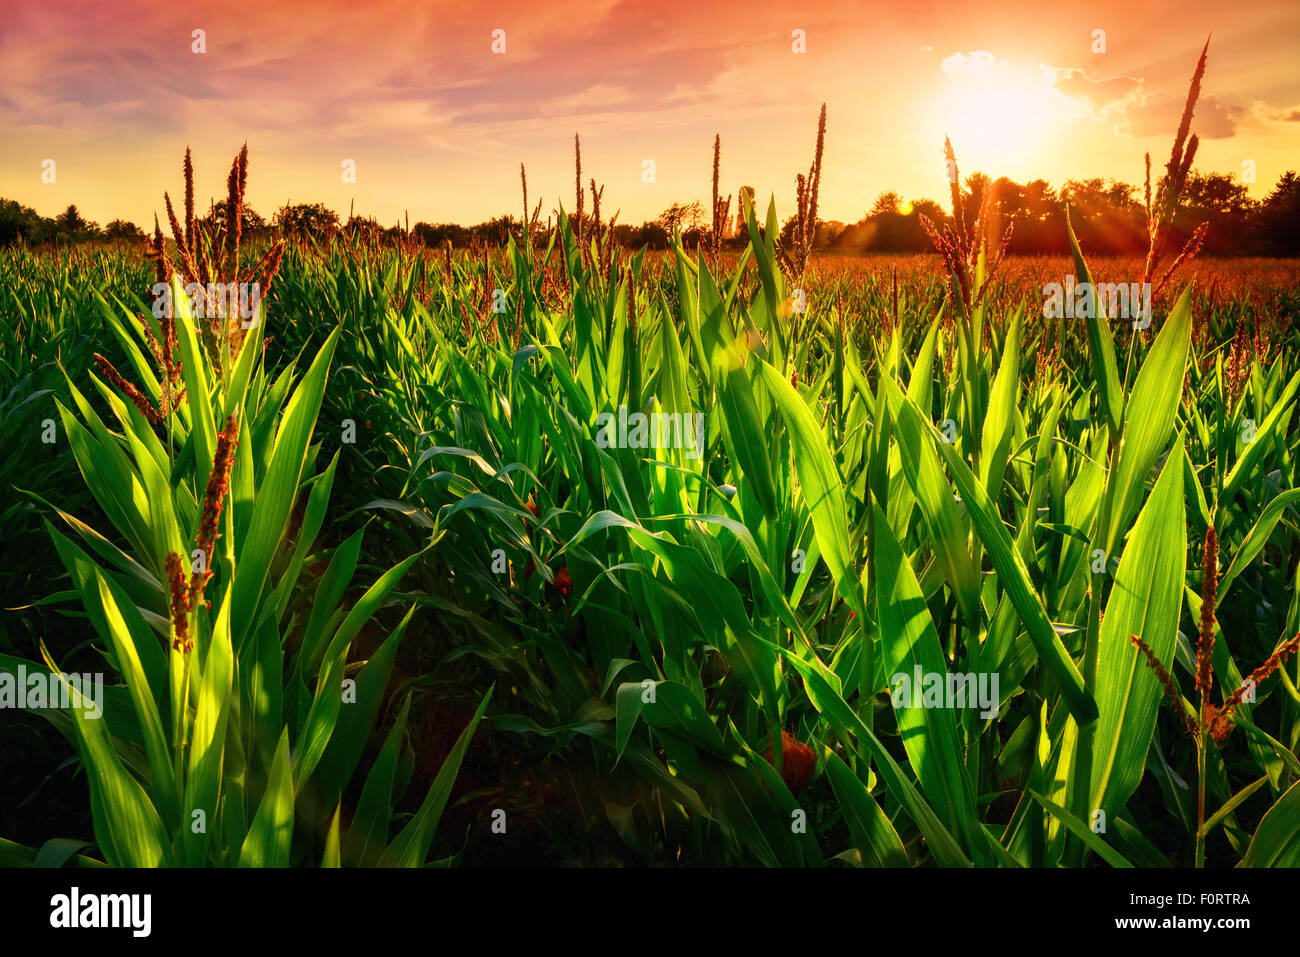 Rows of fresh corn plants on a field with beautiful warm sunset light and vibrant colors Stock Photo